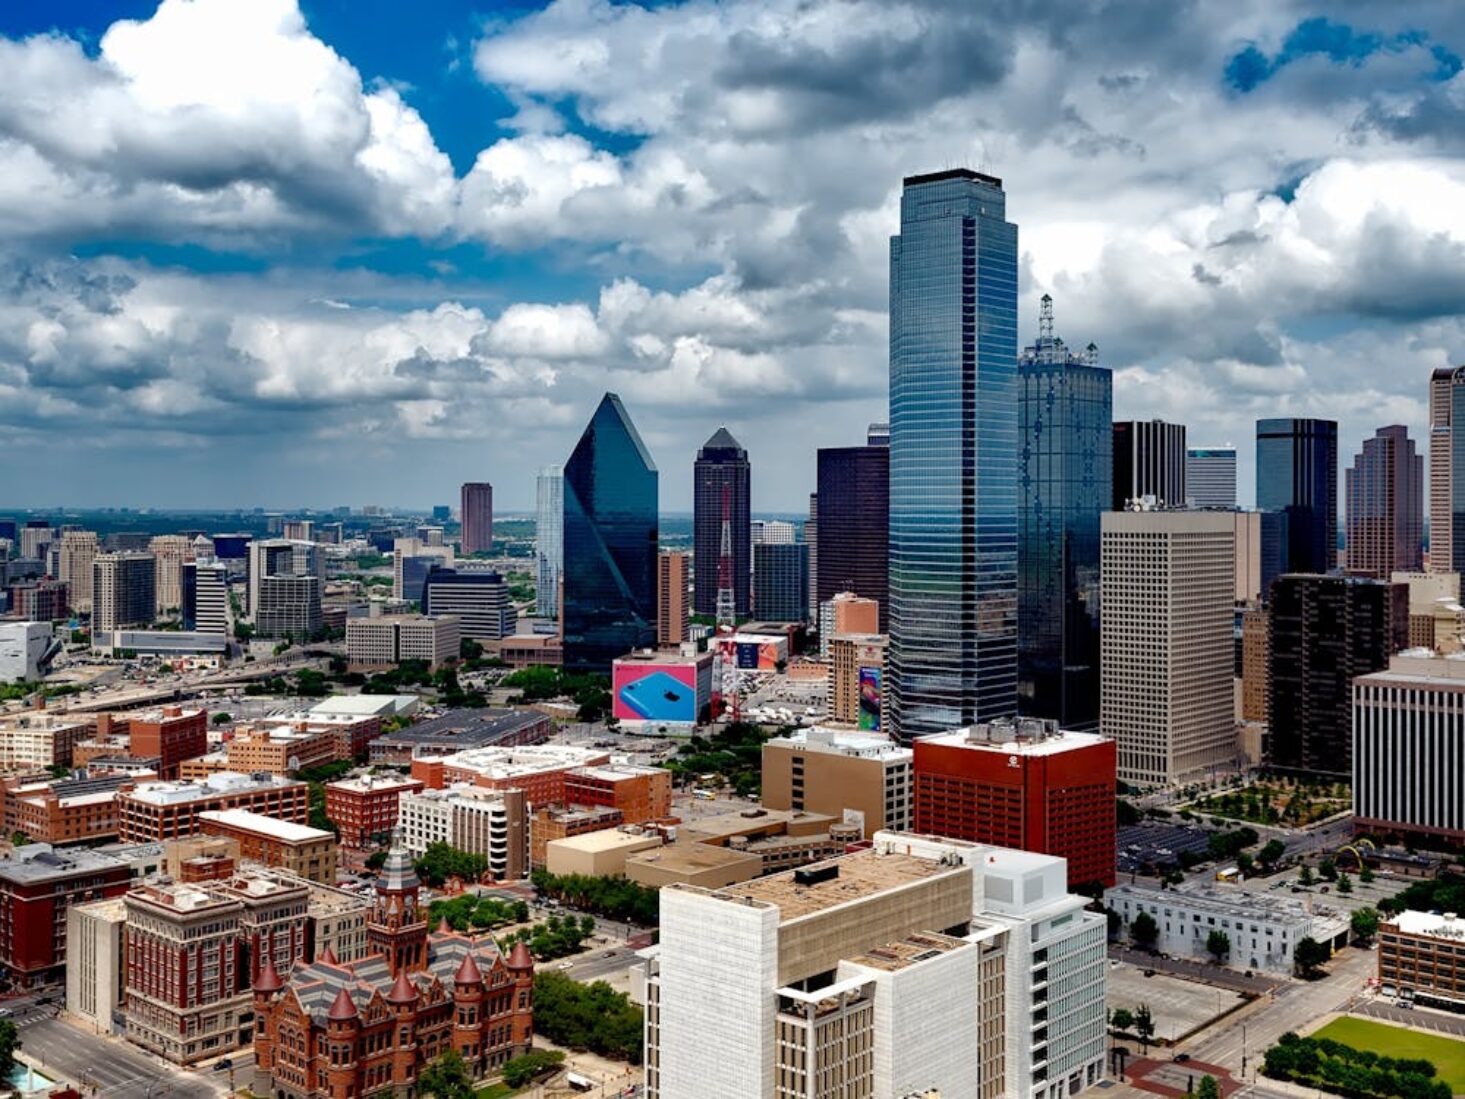 Dallas attractions for photography lovers